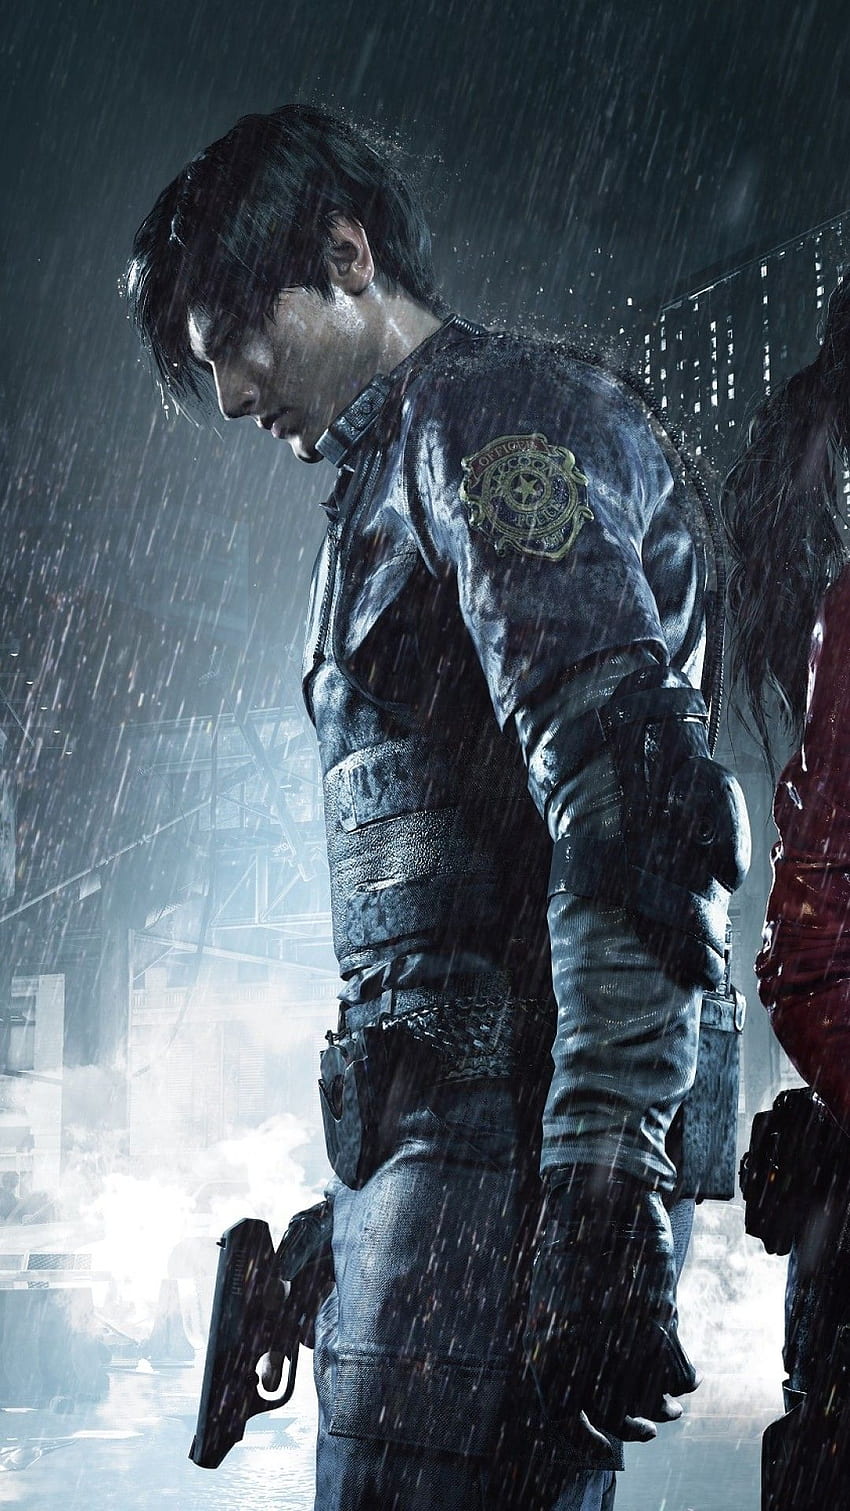 Resident Evil 2, Leon Scott Kennedy for iPhone 8, iPhone 7 Plus, iPhone 6+, Sony Xperia Z, HTC One HD phone wallpaper